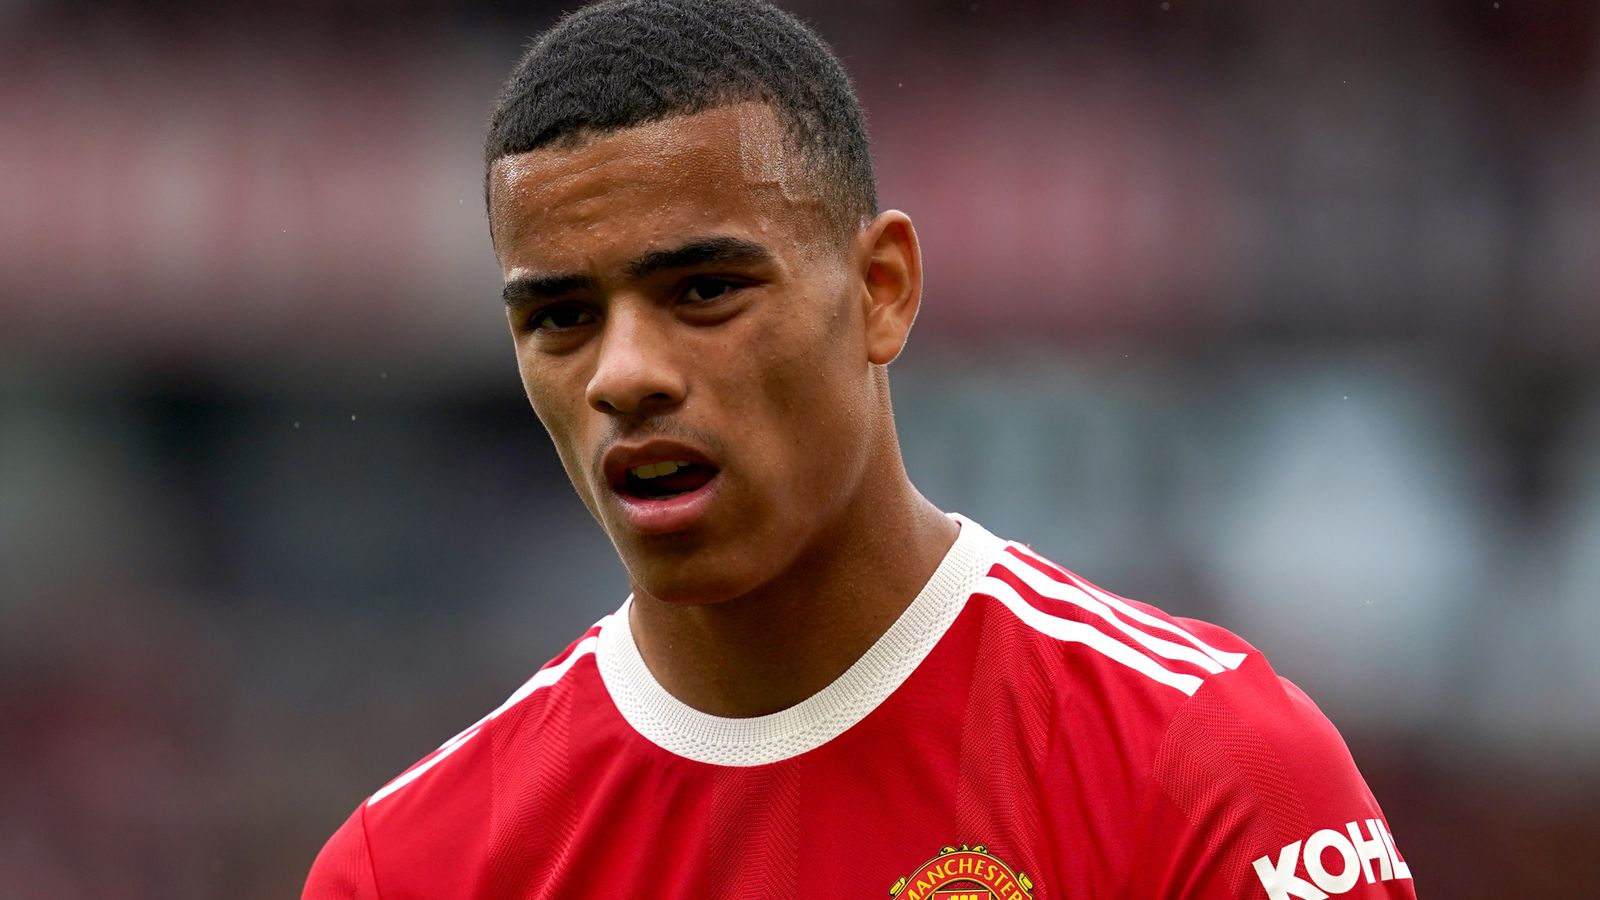 Mason Greenwood: Manchester United Forward Has All Charges Against Him Dropped